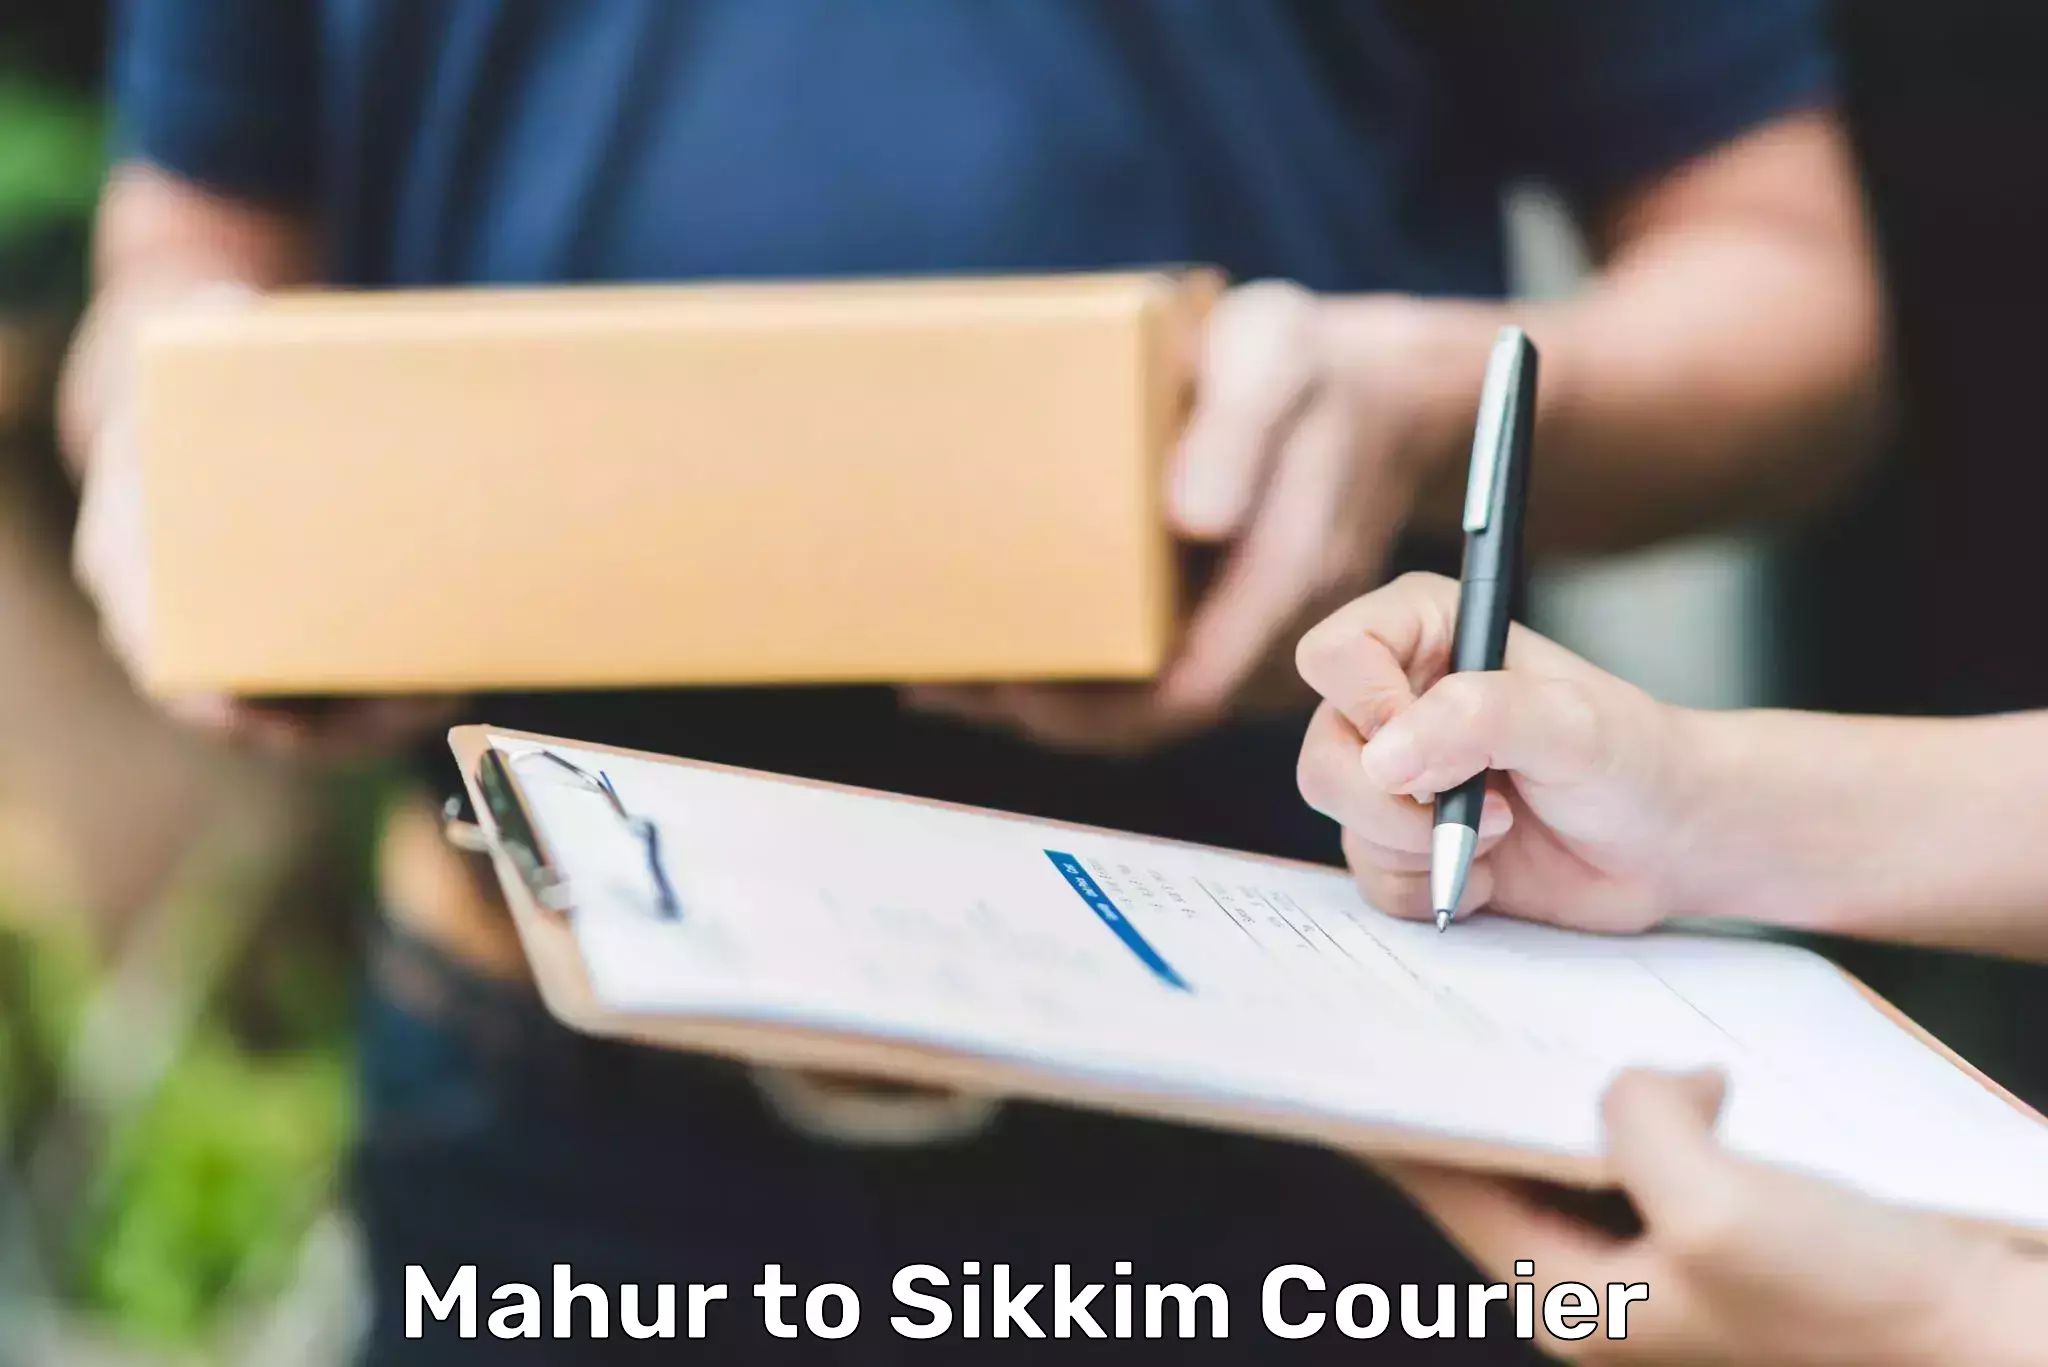 Courier service comparison in Mahur to Sikkim